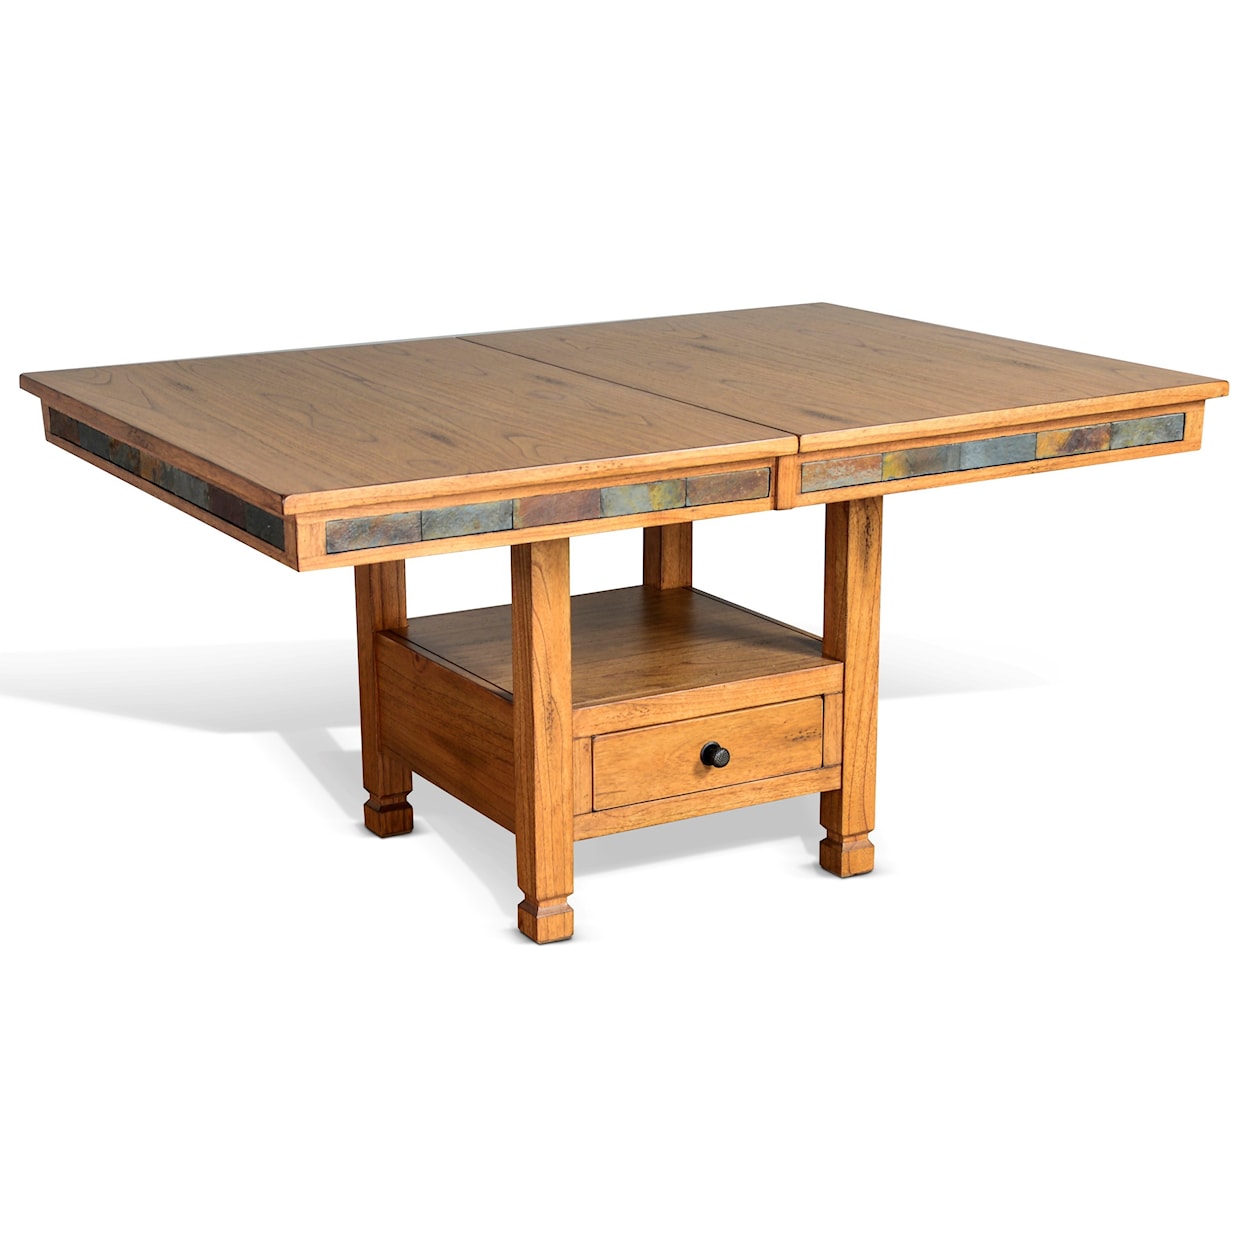 Sunny Designs Sedona 2 Butterfly Dining Table